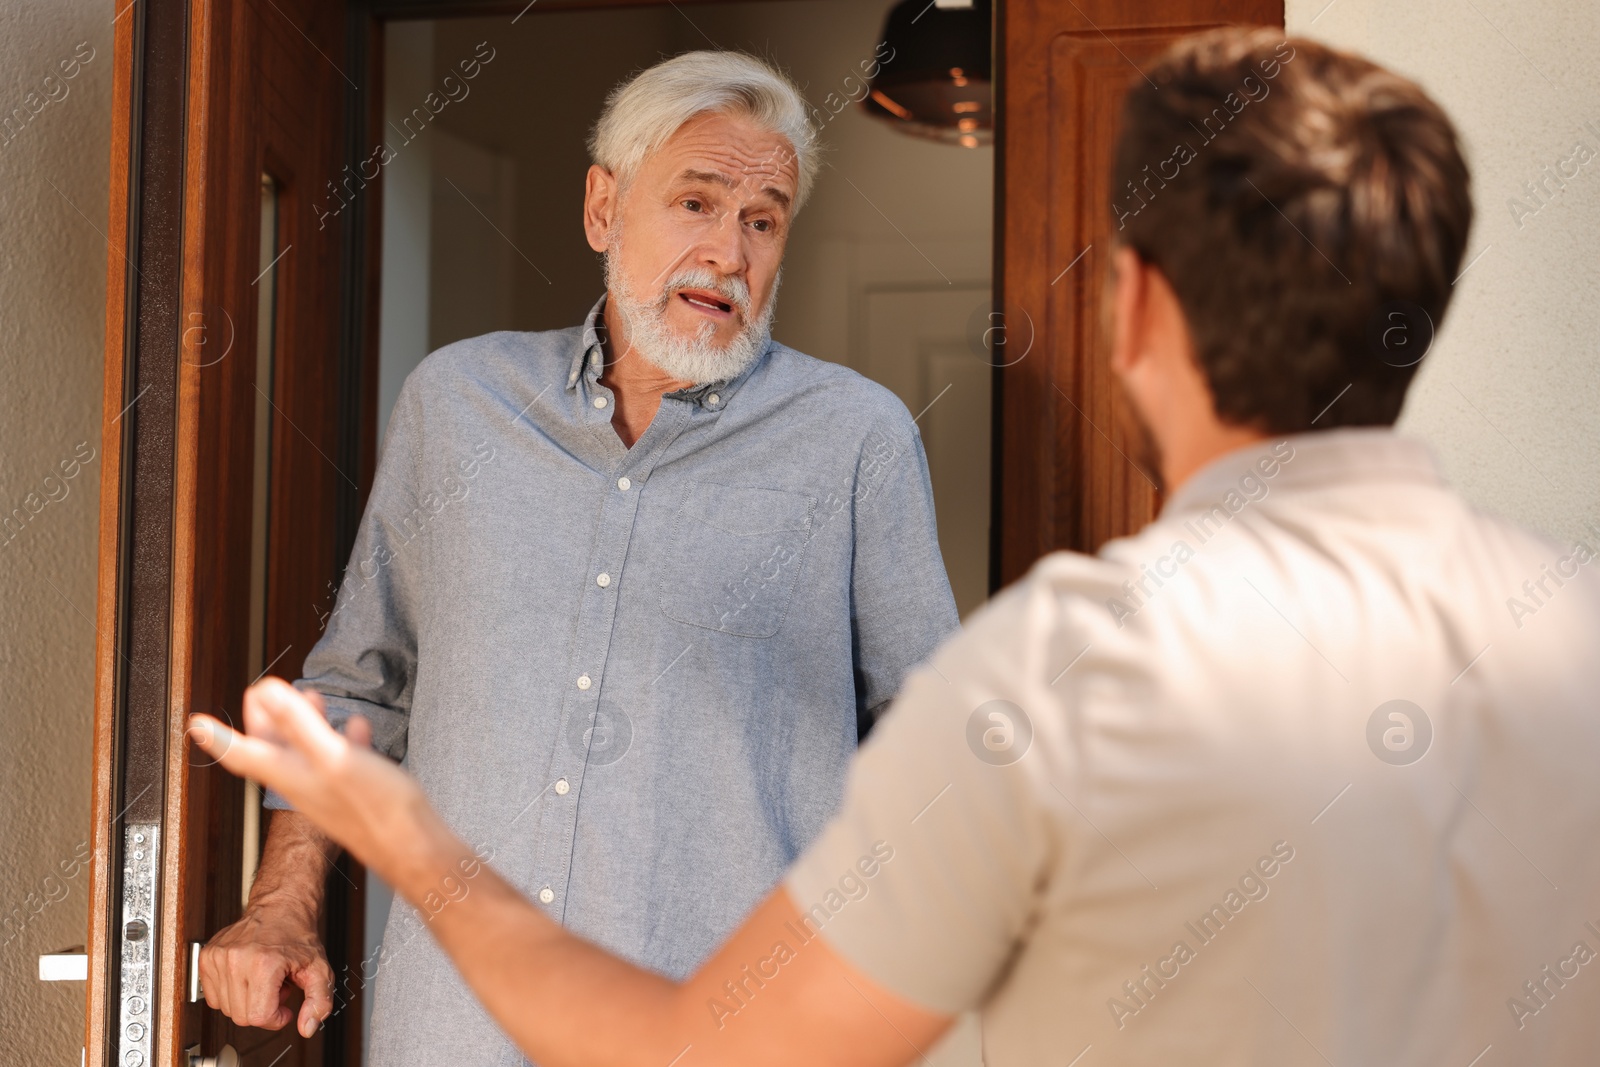 Photo of Emotional neighbours having argument near house outdoors